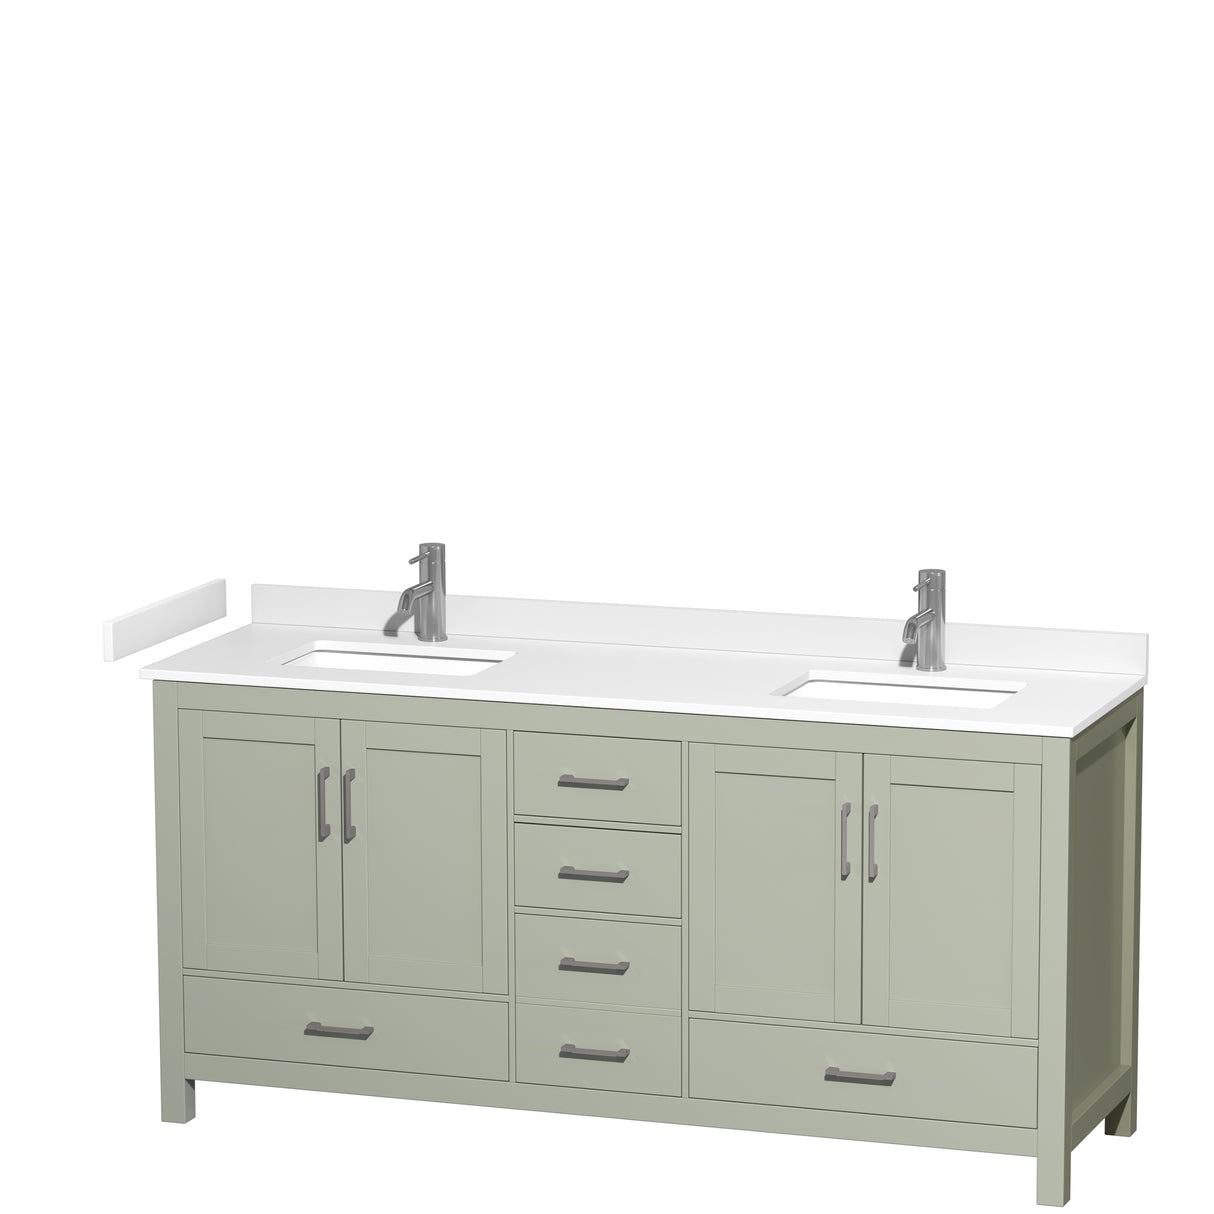 Sheffield 72 inch Double Bathroom Vanity in Light Green White Cultured Marble Countertop Undermount Square Sinks Brushed Nickel Trim